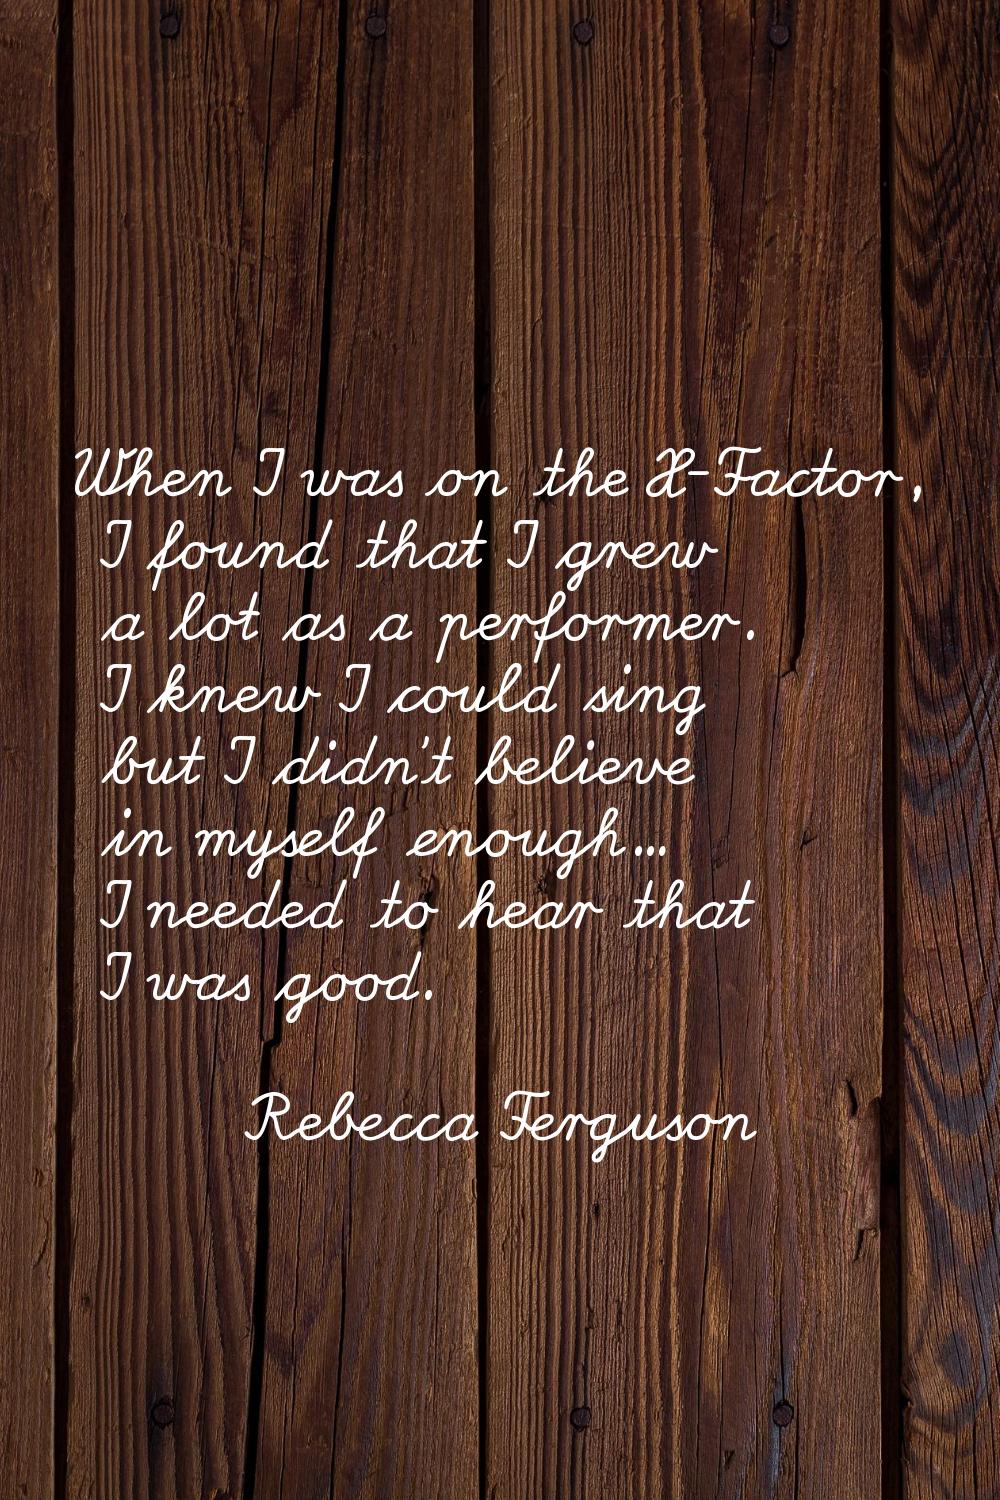 When I was on the X-Factor, I found that I grew a lot as a performer. I knew I could sing but I did